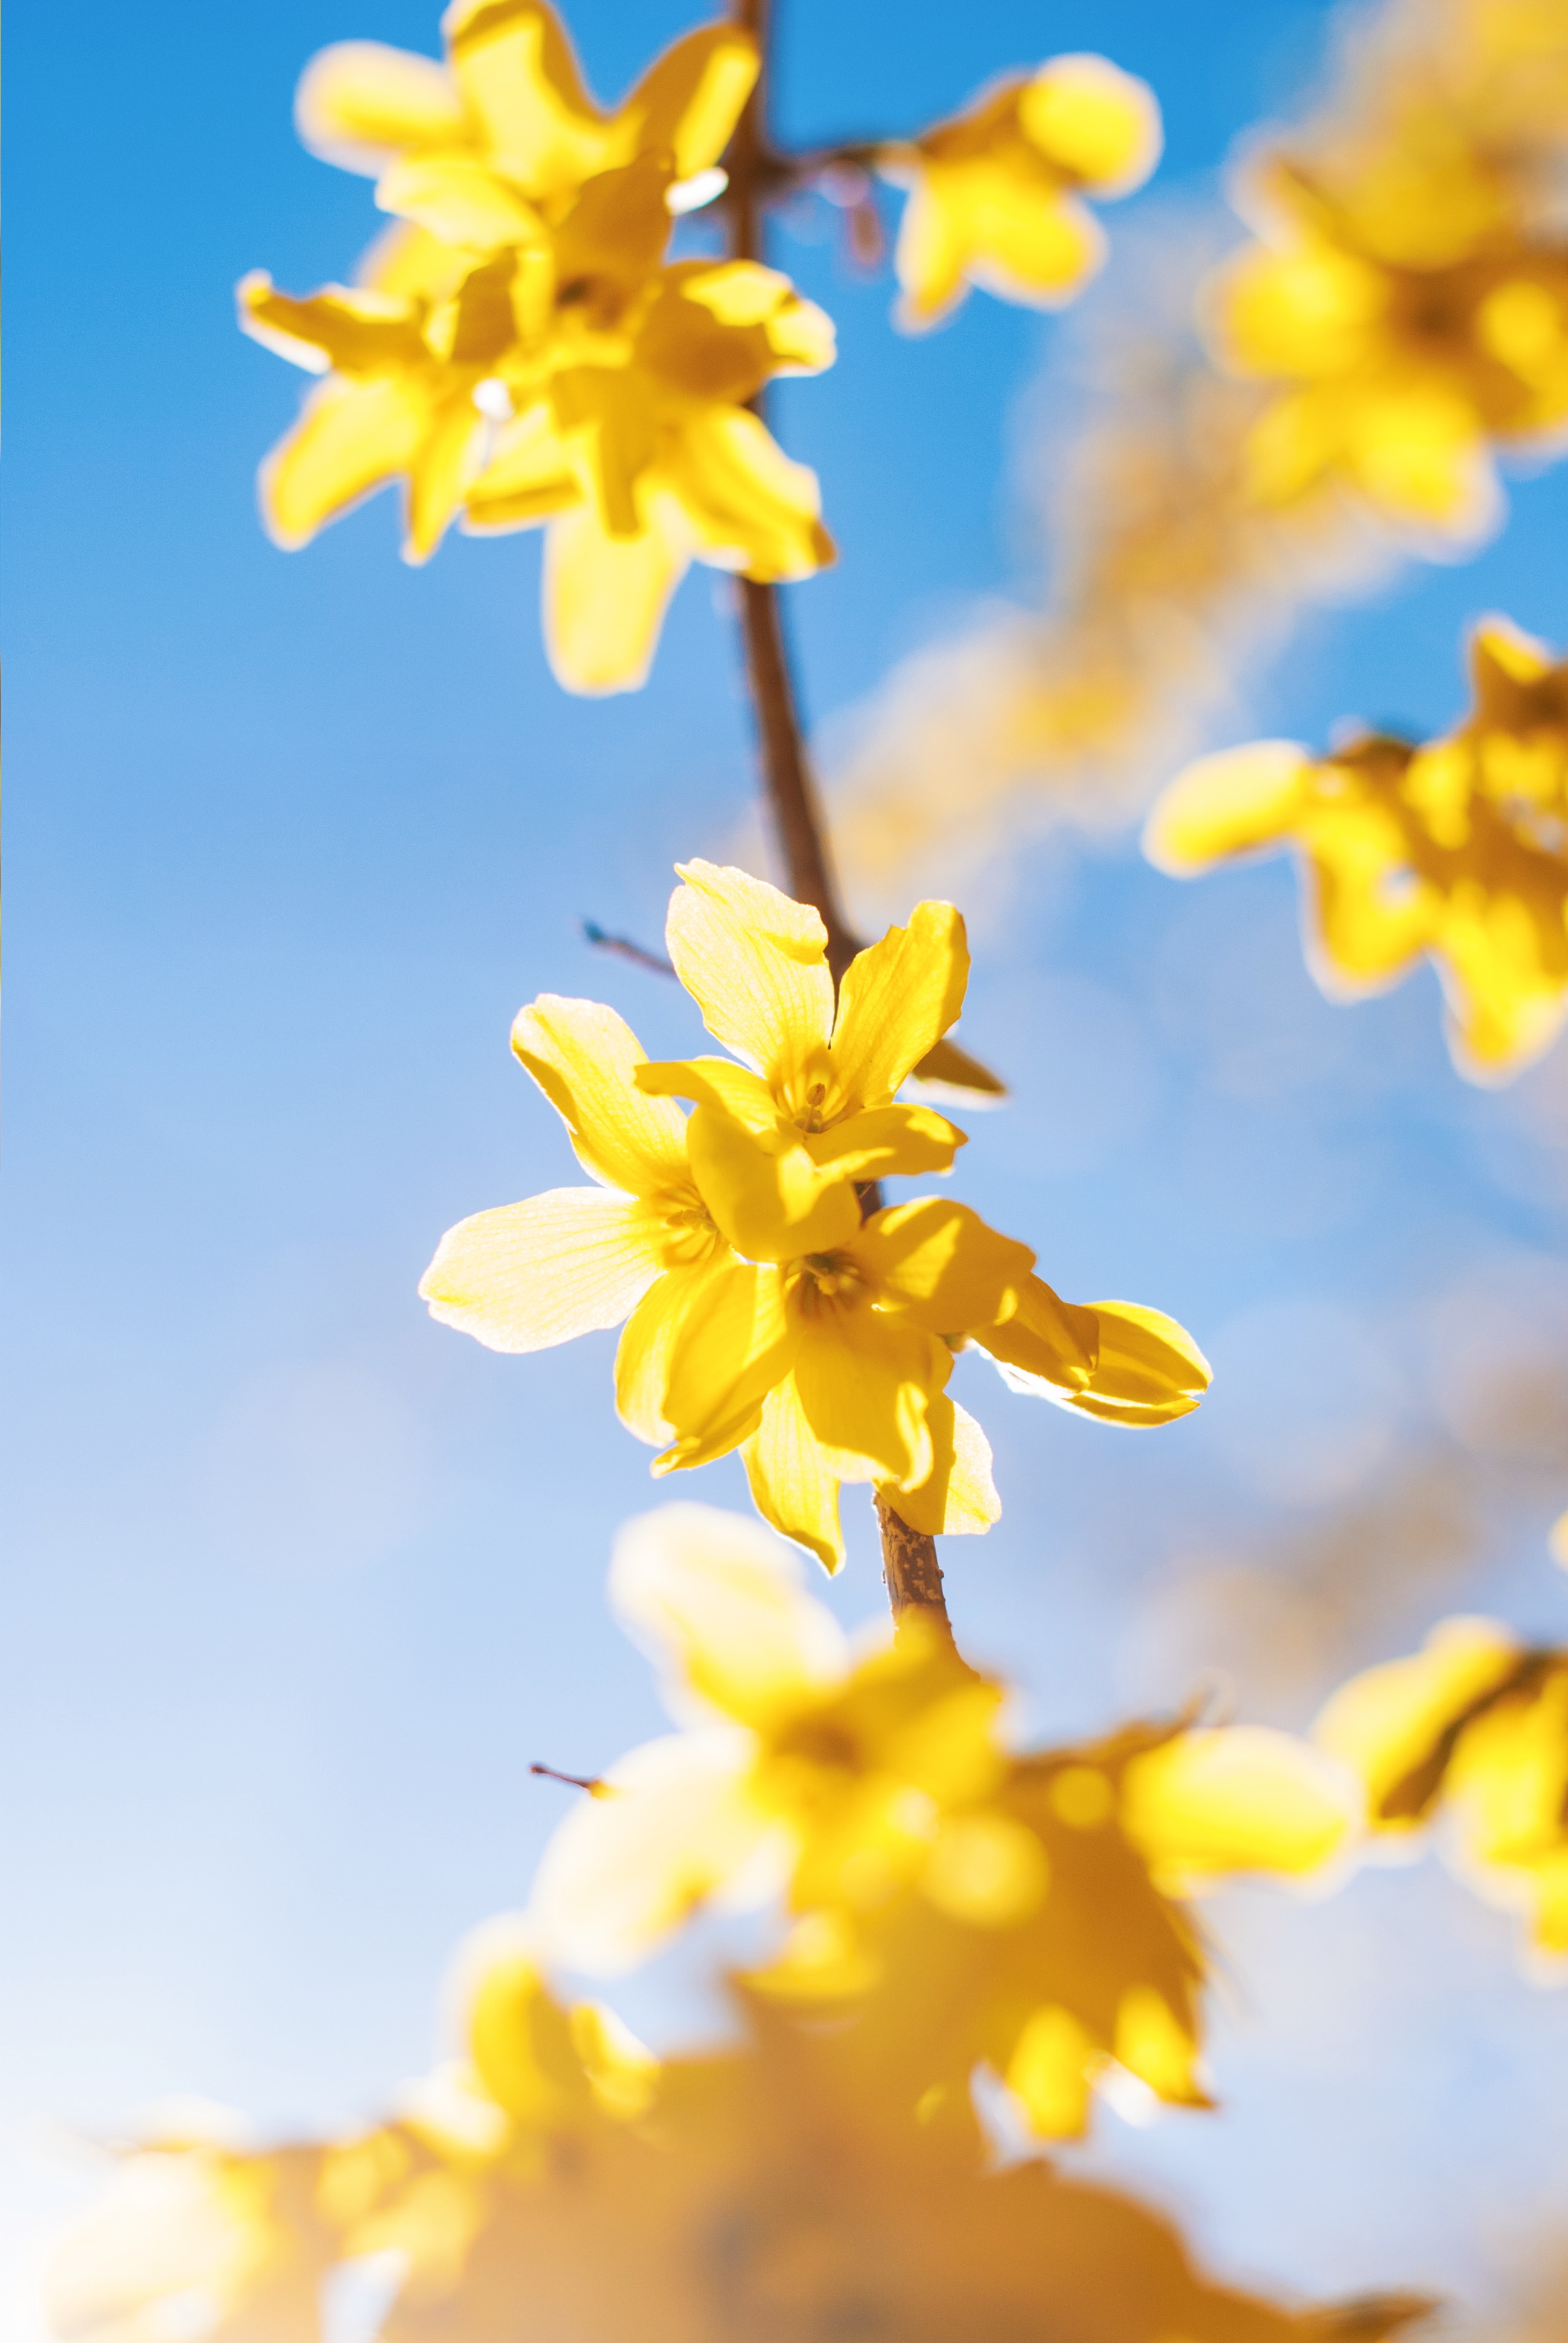 Forsythia Blossoms Are Coming Soon - Native Wildflowers Nursery